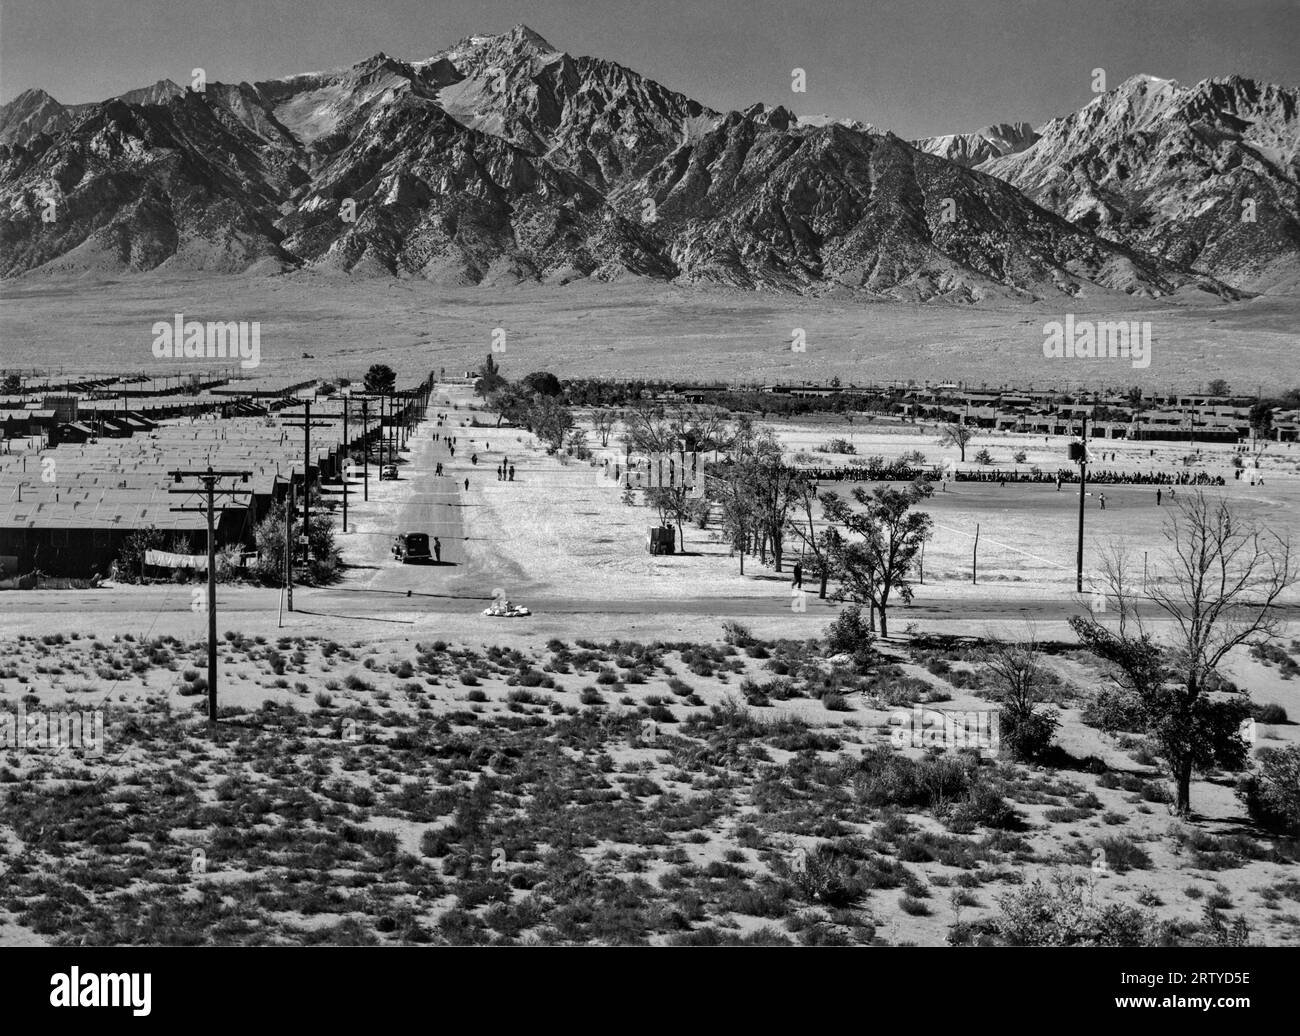 Owens Valley, California     1943 View from a guard tower of the Manzanar Relocation Center, one of the smaller Internment camps for Japanese-Americans. Photograph shows the western side of the grounds with the Sierra Nevada Mountains. At its peak, Manzanar held around 10,000 inmates, with the first inmates arriving in 1942, and the last leaving in 1945. Today, it is preserved as a National Historic Site. Photograph by Ansel Adams. Stock Photo